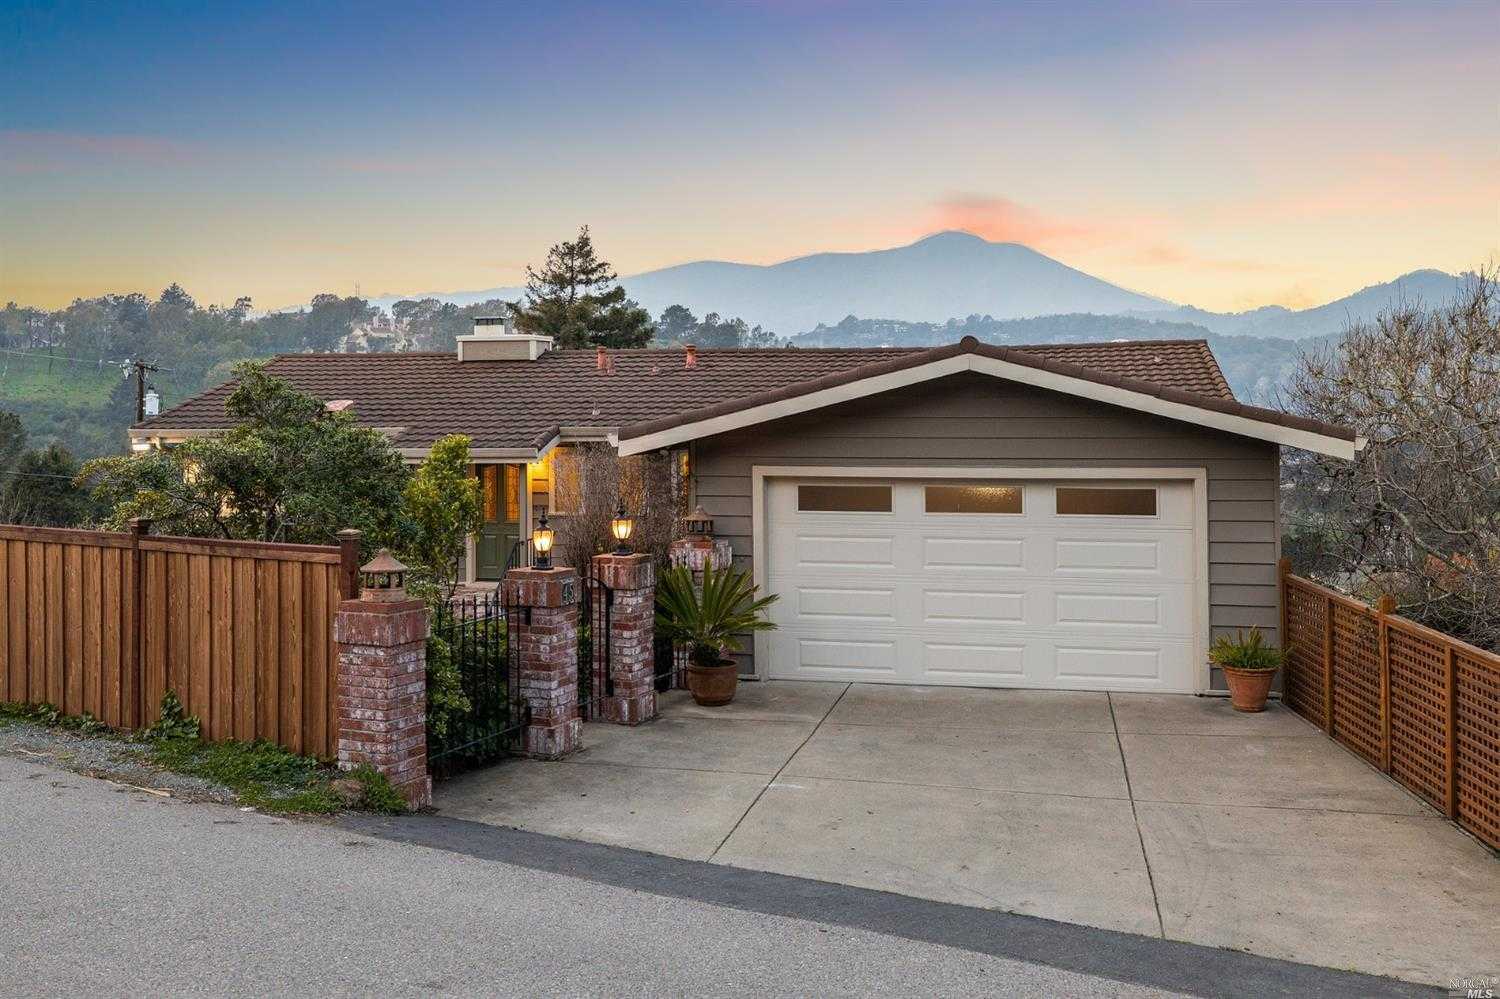 $1,495,000 - 3Br/3Ba -  for Sale in Mill Valley